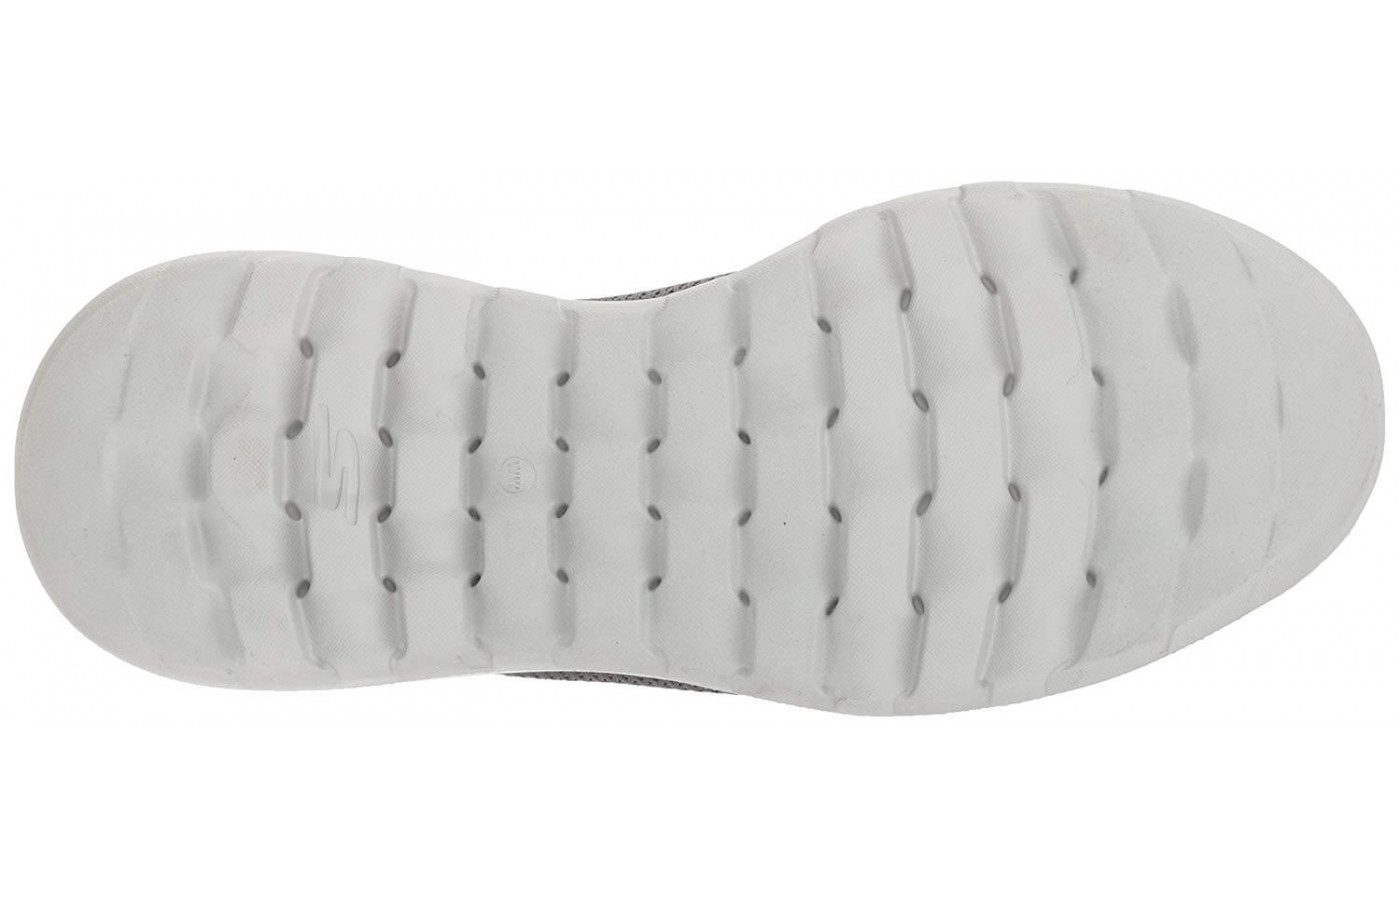 Flexible rubber makes up the GoWalk Max's outsole